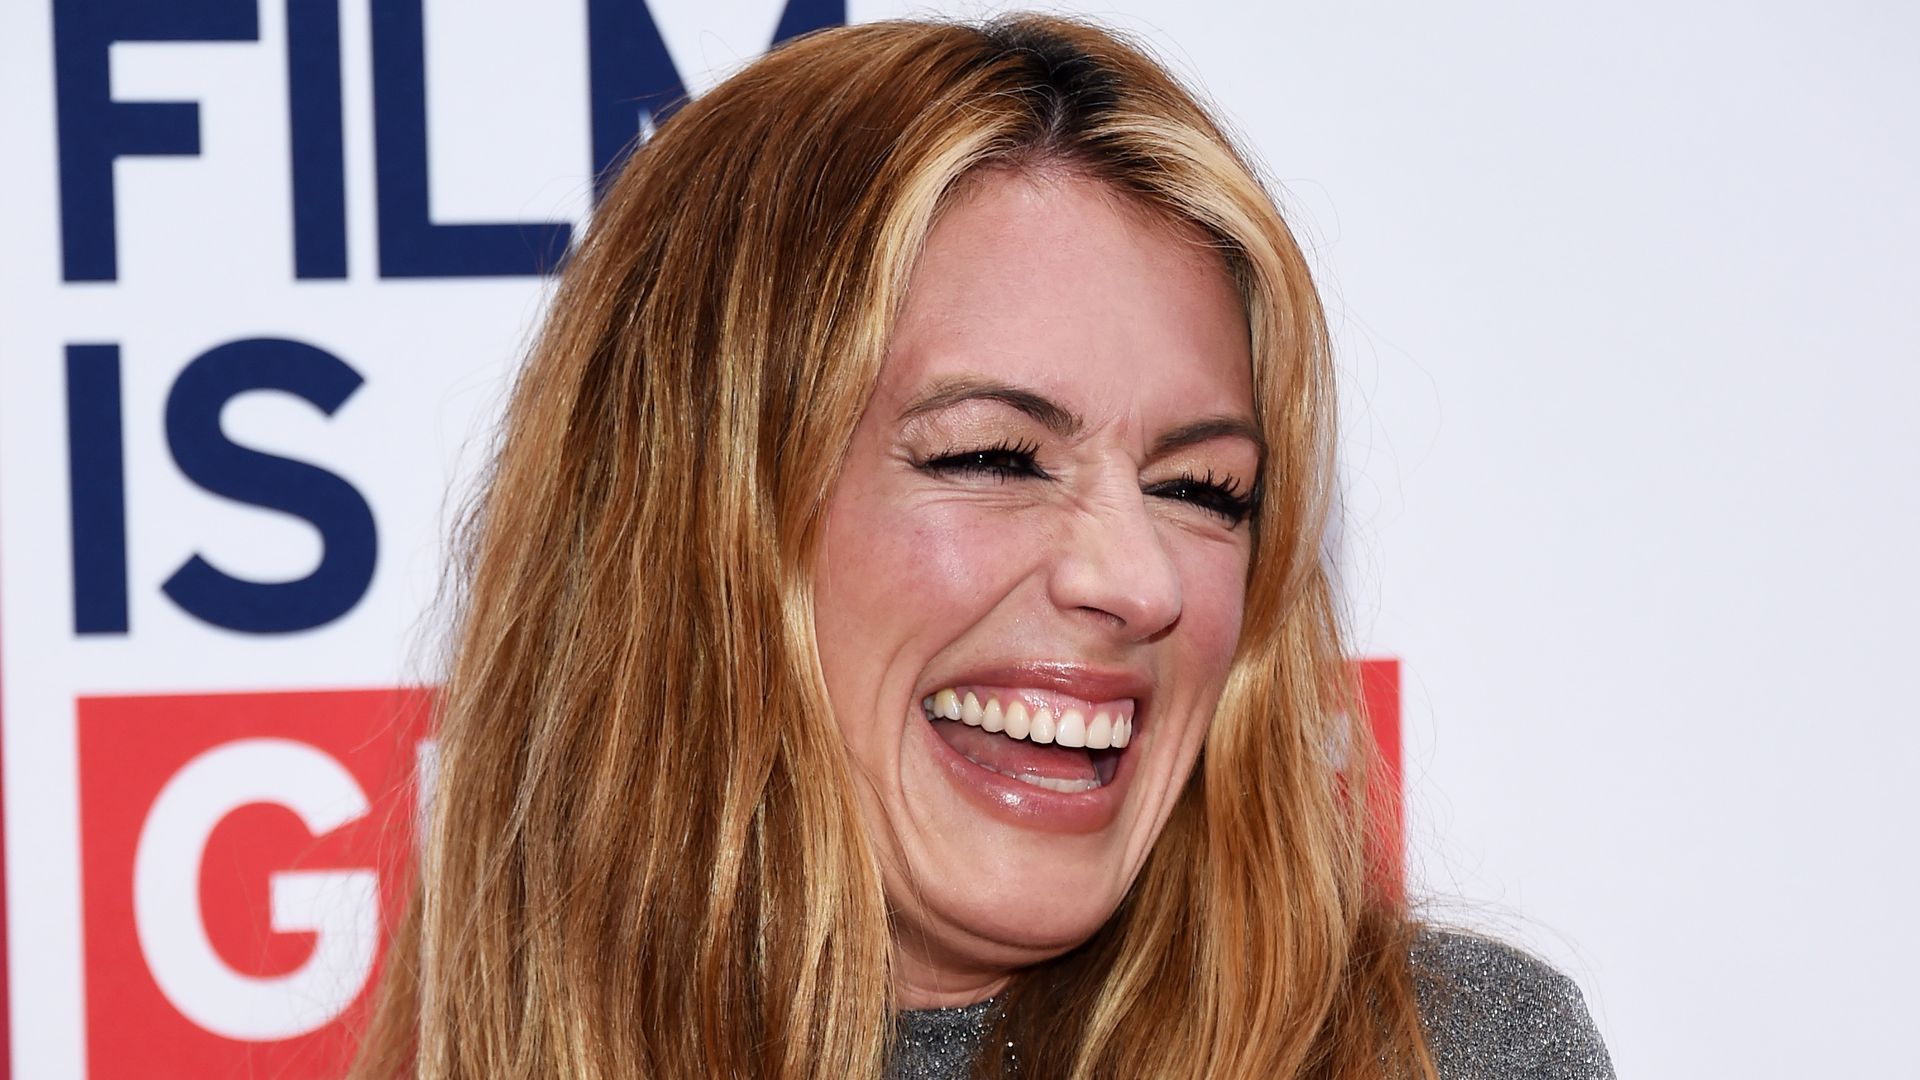 Cat Deeley laughing in sparkly jumper